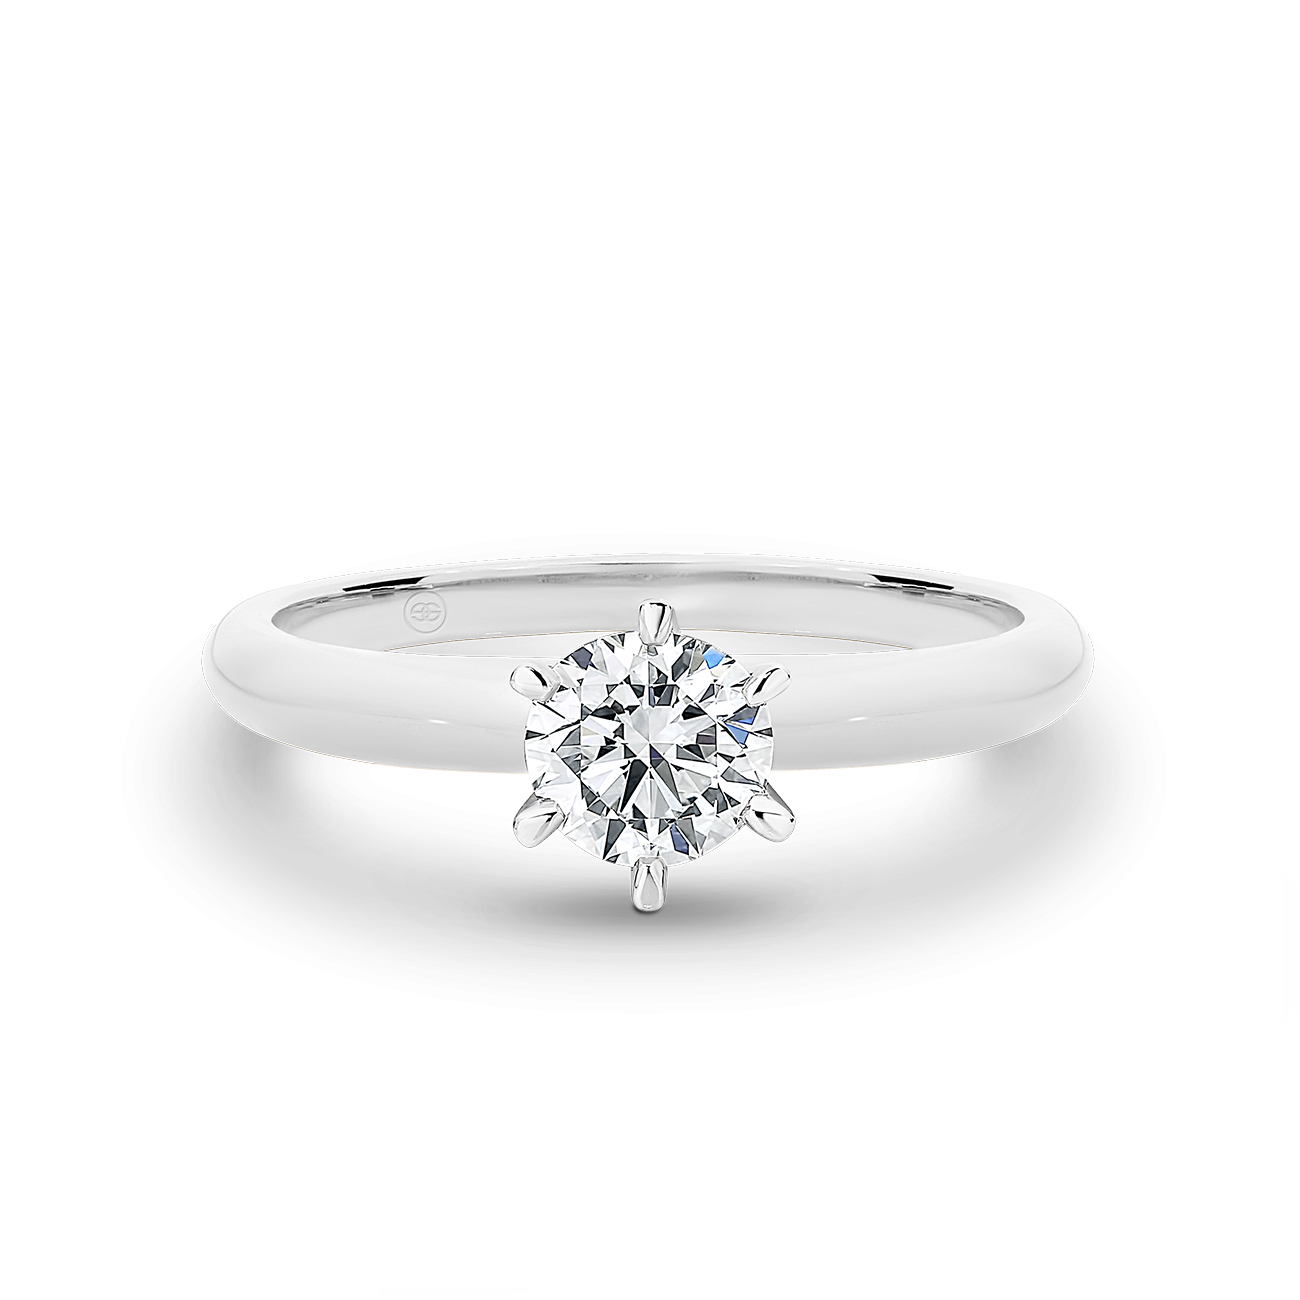 0.40ct Round Brilliant Solitaire Diamond Engagement Ring in 18K White Gold